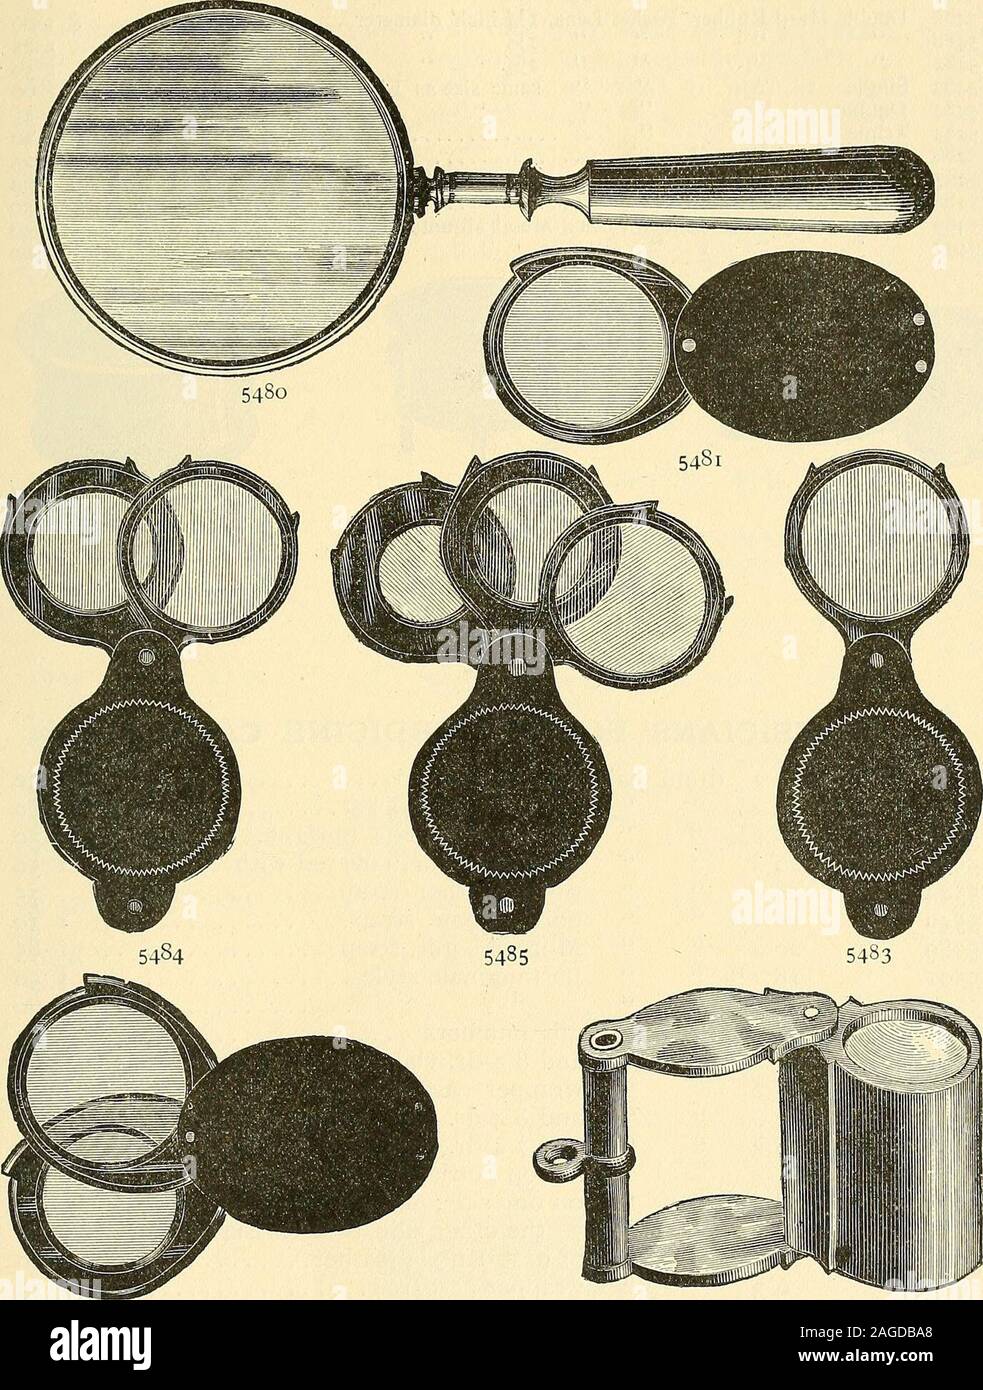 . Catalogue of Sharp & Smith : importers, manufacturers, wholesale and retail dealers in surgical instruments, deformity apparatus, artificial limbs, artificial eyes, elastic stockings, trusses, crutches, supporters, galvanic and faradic batteries, etc., surgeons' appliances of every description. 5466 5467 5472 SHARP & SMITH, CHICAGO. 871 HAND AND POCKET LENSES.. 5482 FIG. *548o Hand Lens, Metal Rimmed *548i Single Hard Rubber Pocket Lens, % inch diameter *S48i I *548i i}4 *548i iJ^ *54Si i^ *5482 Double 3^ *5482 I 5490 |o 75 to: 35 5060 75I 00 7575 872 SHARP & SMITH, CHICAGO. FIG. *5482 *54S2 Stock Photo